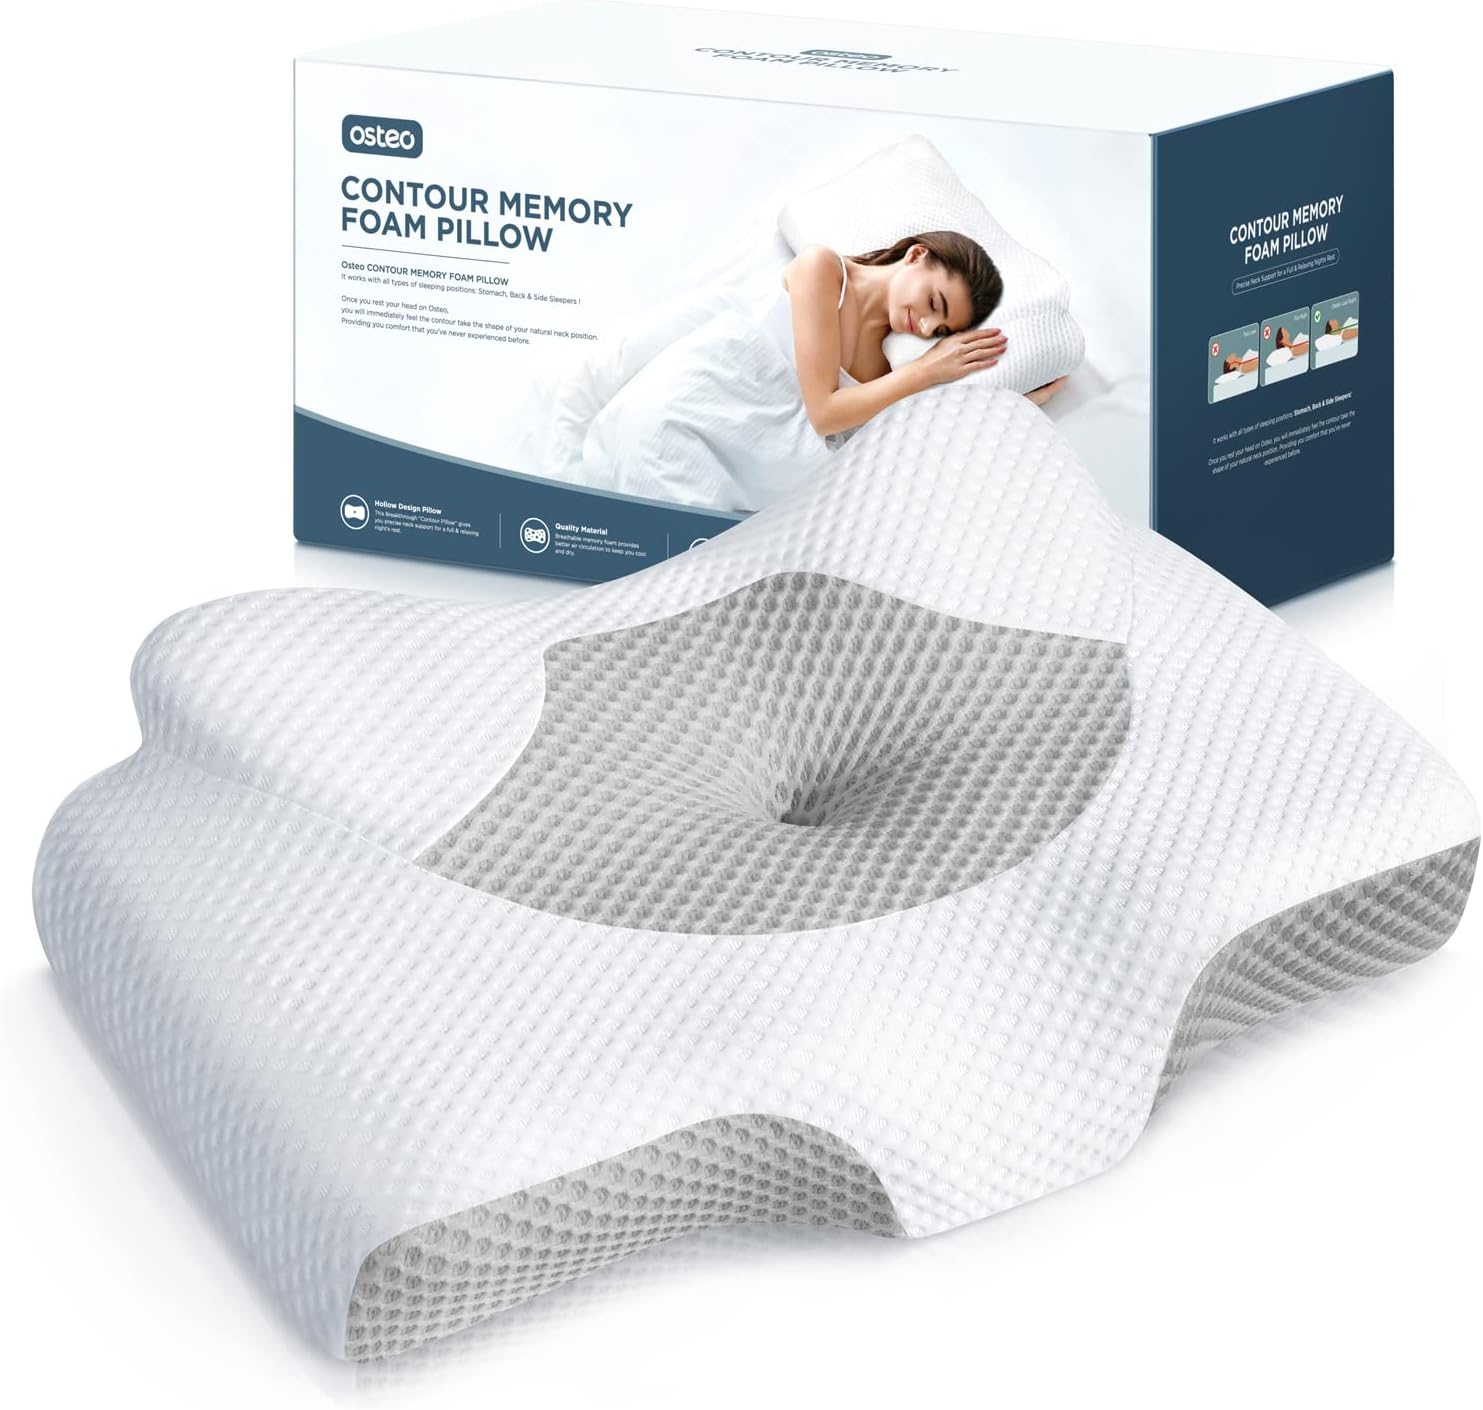 I recently purchased this pillow and it has been an absolute game-changer for me! For the past year, I've struggled with neck pain and discomfort, which often made it difficult to get a good night' sleep. I've tried various pillows in the past, including the My Pillow pillow, but none have provided the support and relief that this one has.From the very first night, I could feel a significant difference. The pillow' design perfectly cradles my neck and head, providing just the right amount of